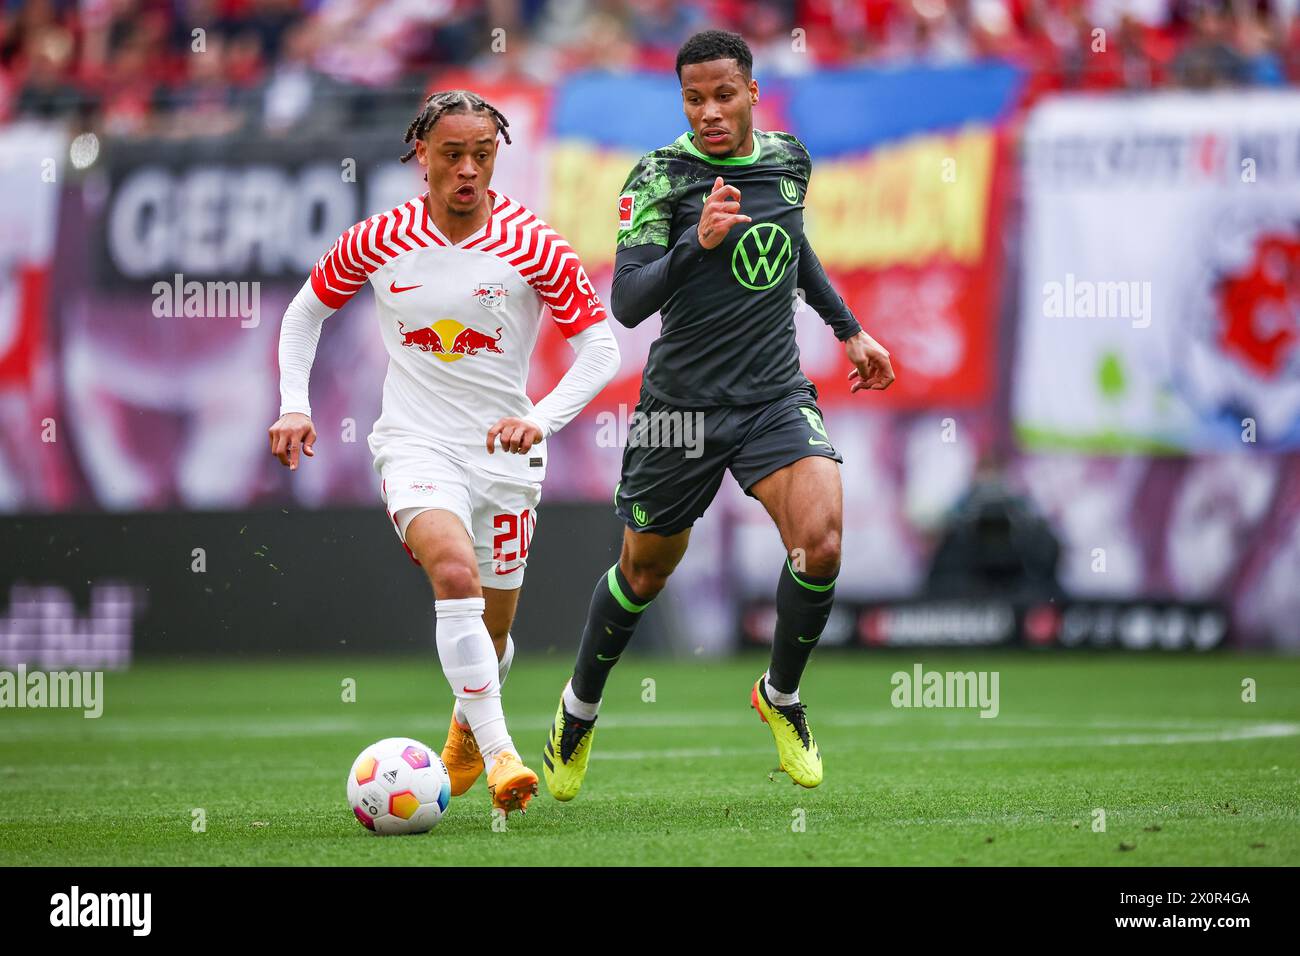 Leipzig, Germany. 13th Apr, 2024. Soccer: Bundesliga, RB Leipzig - VfL Wolfsburg, matchday 29 at the Red Bull Arena. Leipzig player Xavi Simons (l) and Wolfsburg's Aster Vranckx in a duel. Credit: Jan Woitas/dpa - IMPORTANT NOTE: In accordance with the regulations of the DFL German Football League and the DFB German Football Association, it is prohibited to utilize or have utilized photographs taken in the stadium and/or of the match in the form of sequential images and/or video-like photo series./dpa/Alamy Live News Stock Photo